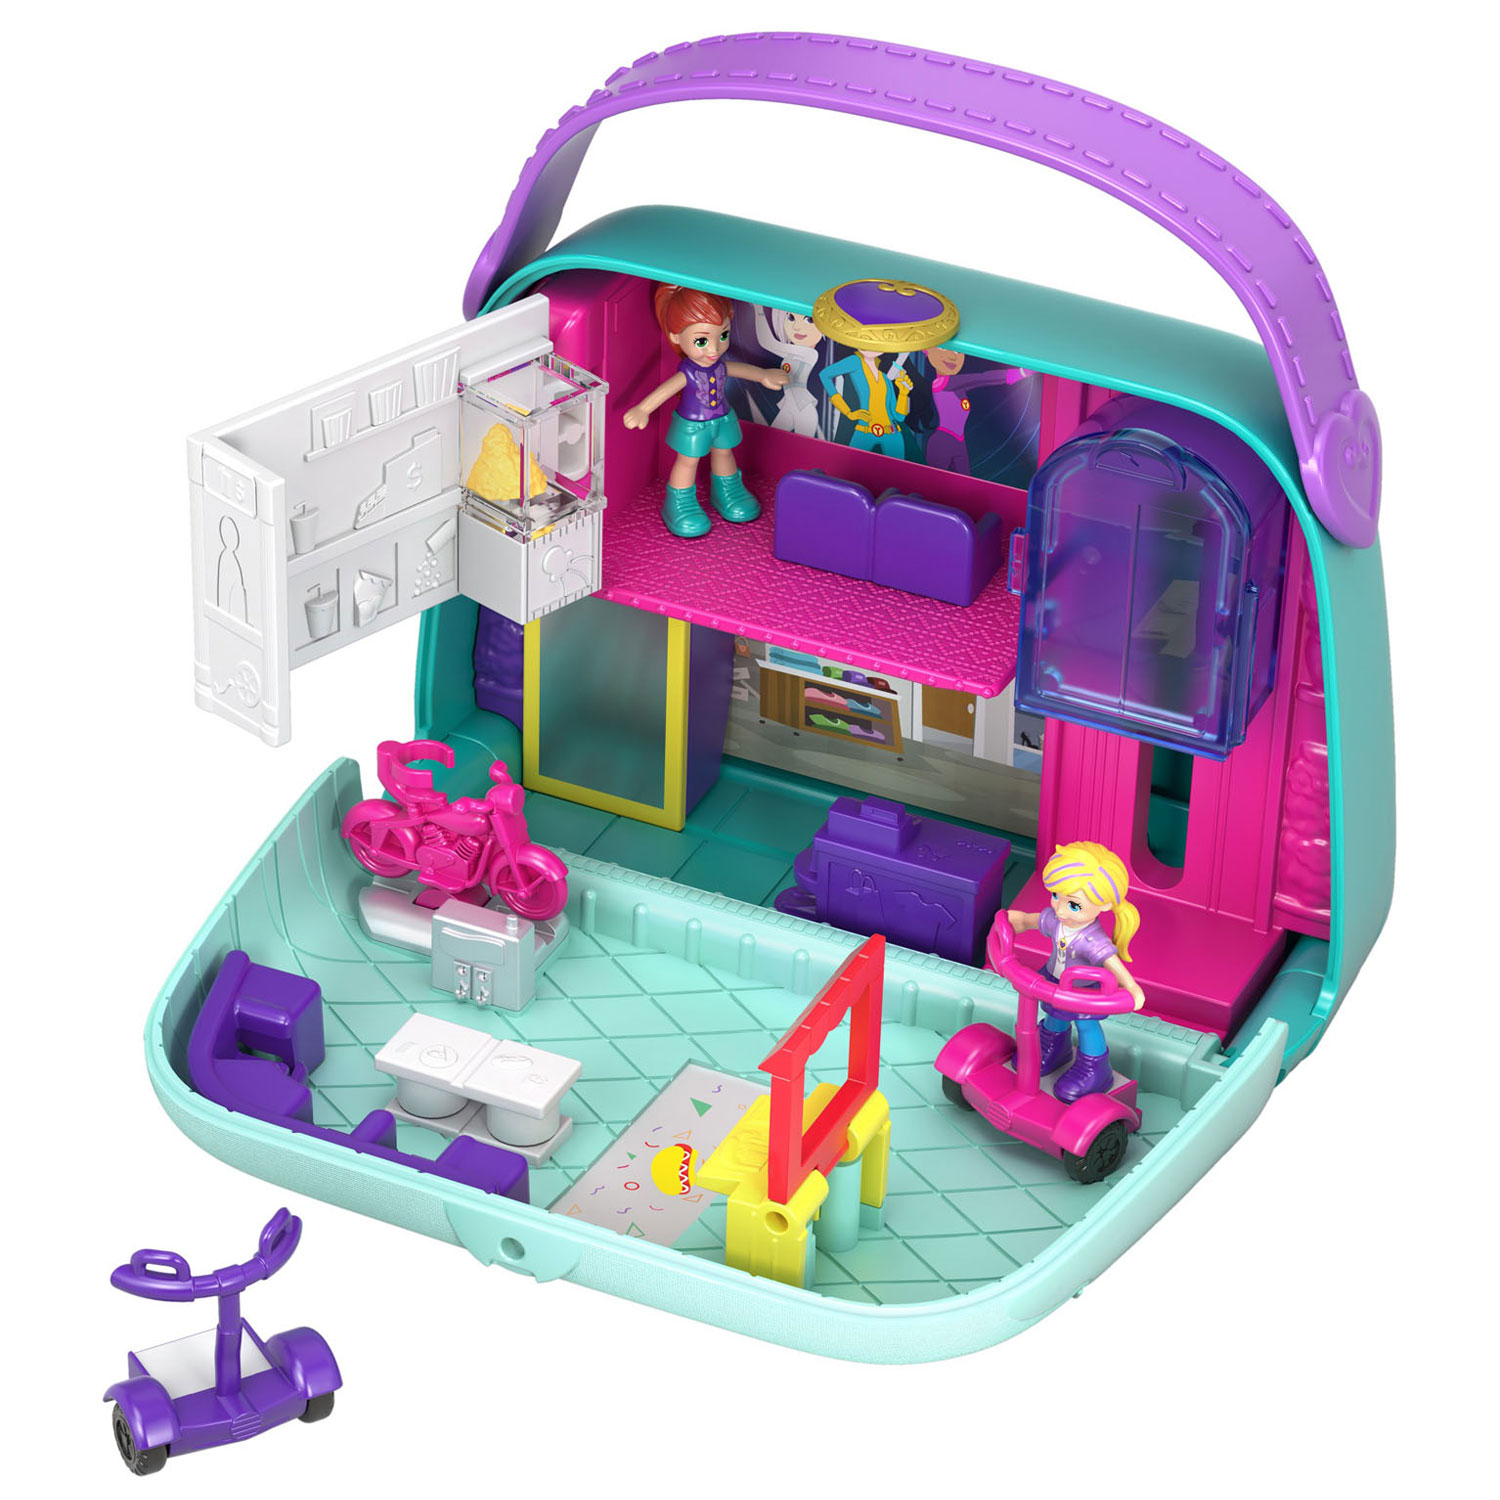 POLLY POCKET POCKET WORLD - THE TOY STORE